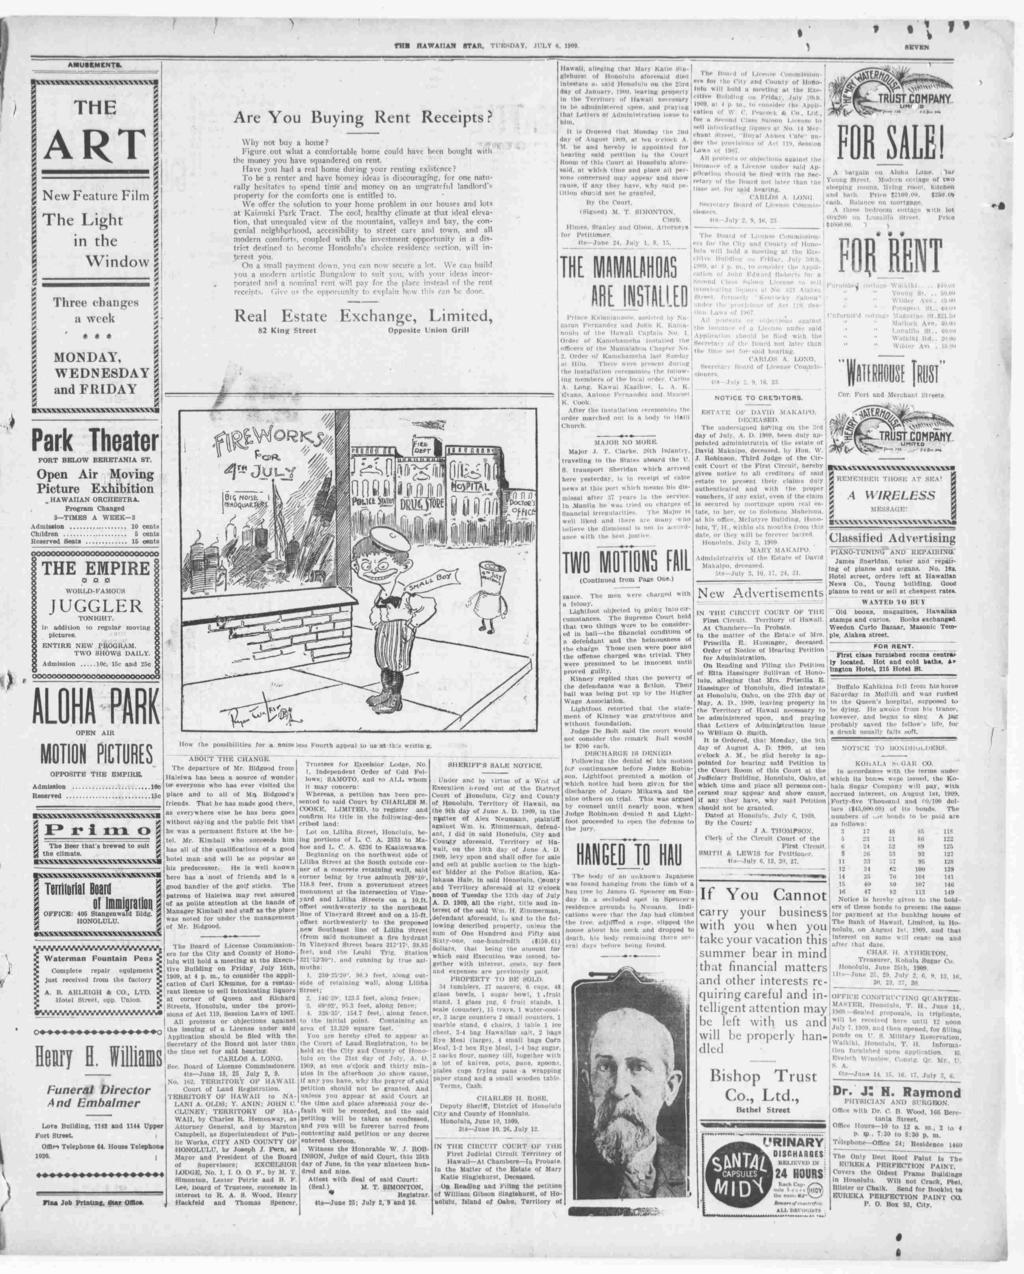 TUB HAWAAN STAR, TUESDAY! JULY 6, 1909. SEVEN p AMUSEMENTS., THE ART New Feature Flm The Lght n the Wndow!